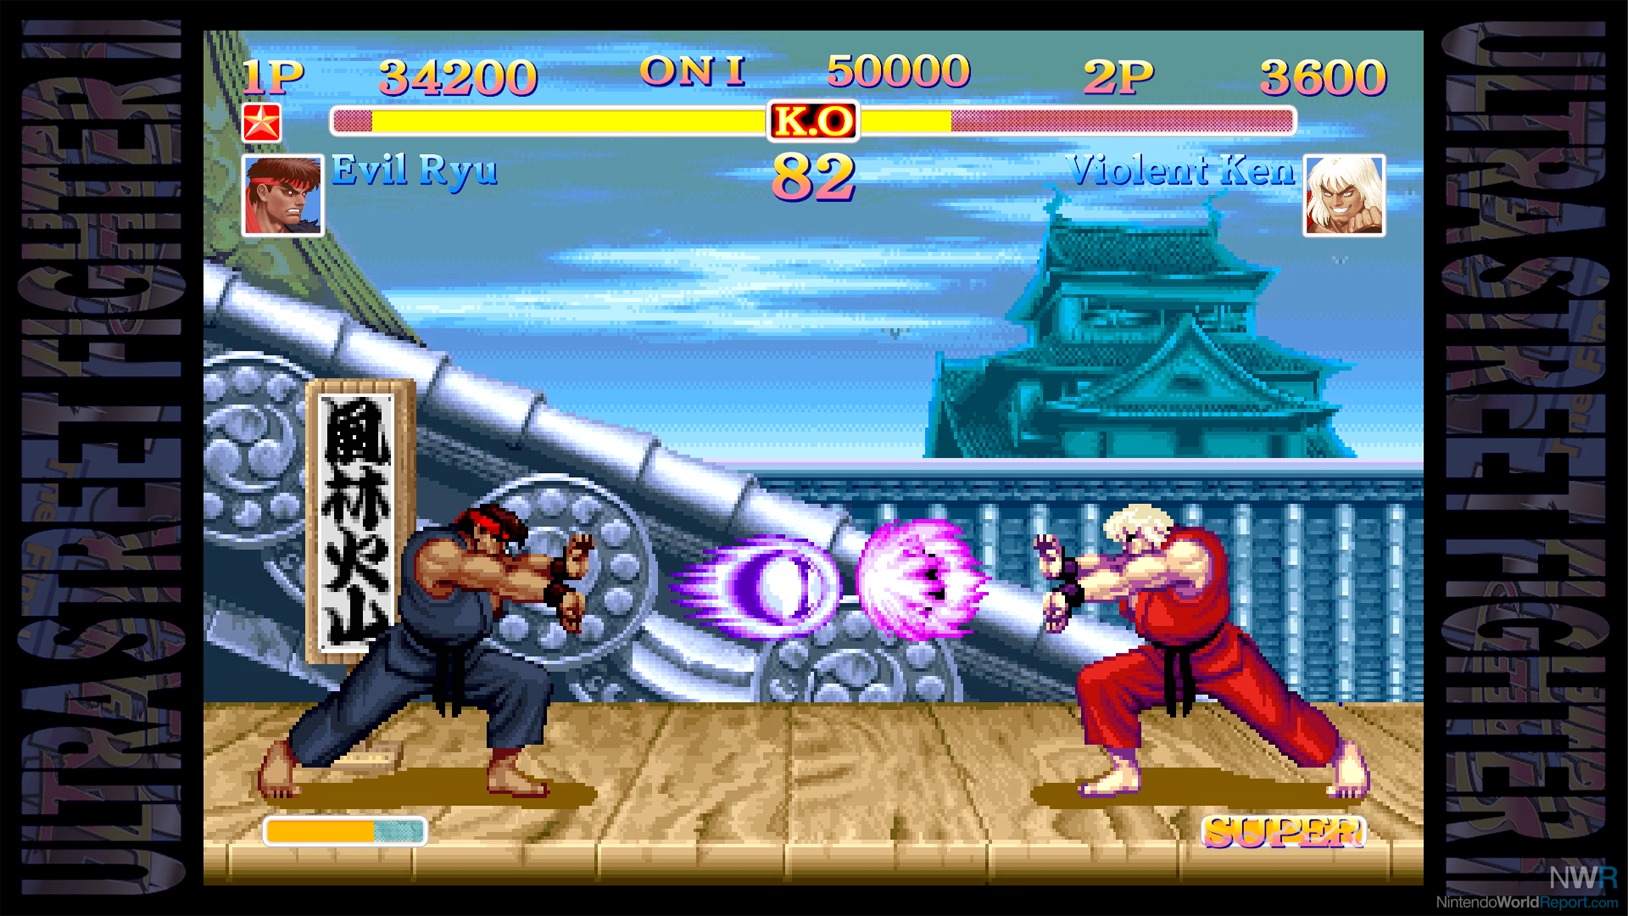 How to get the secret, unlockable character in 'Street Fighter II' for  Nintendo Switch